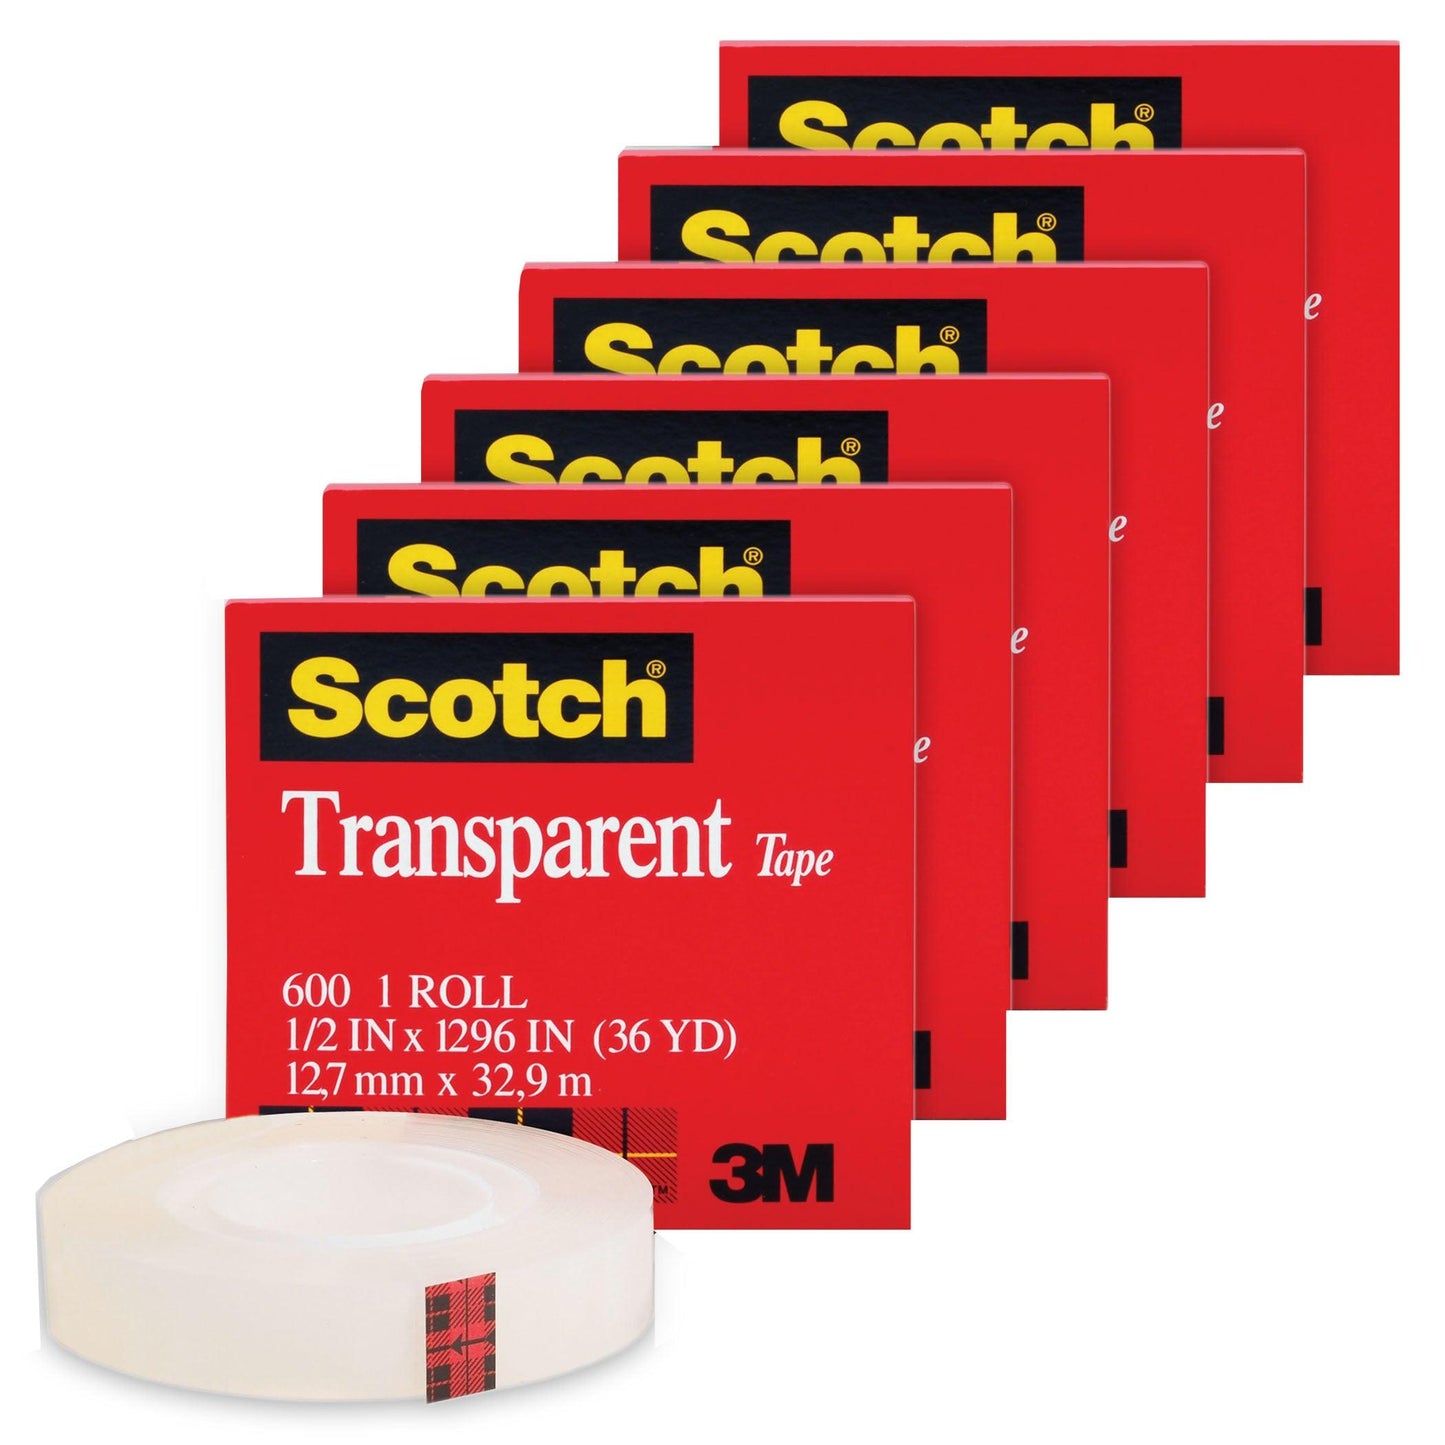 Transparent Tape Roll, 1/2" x 1296", Pack of 6 - Loomini